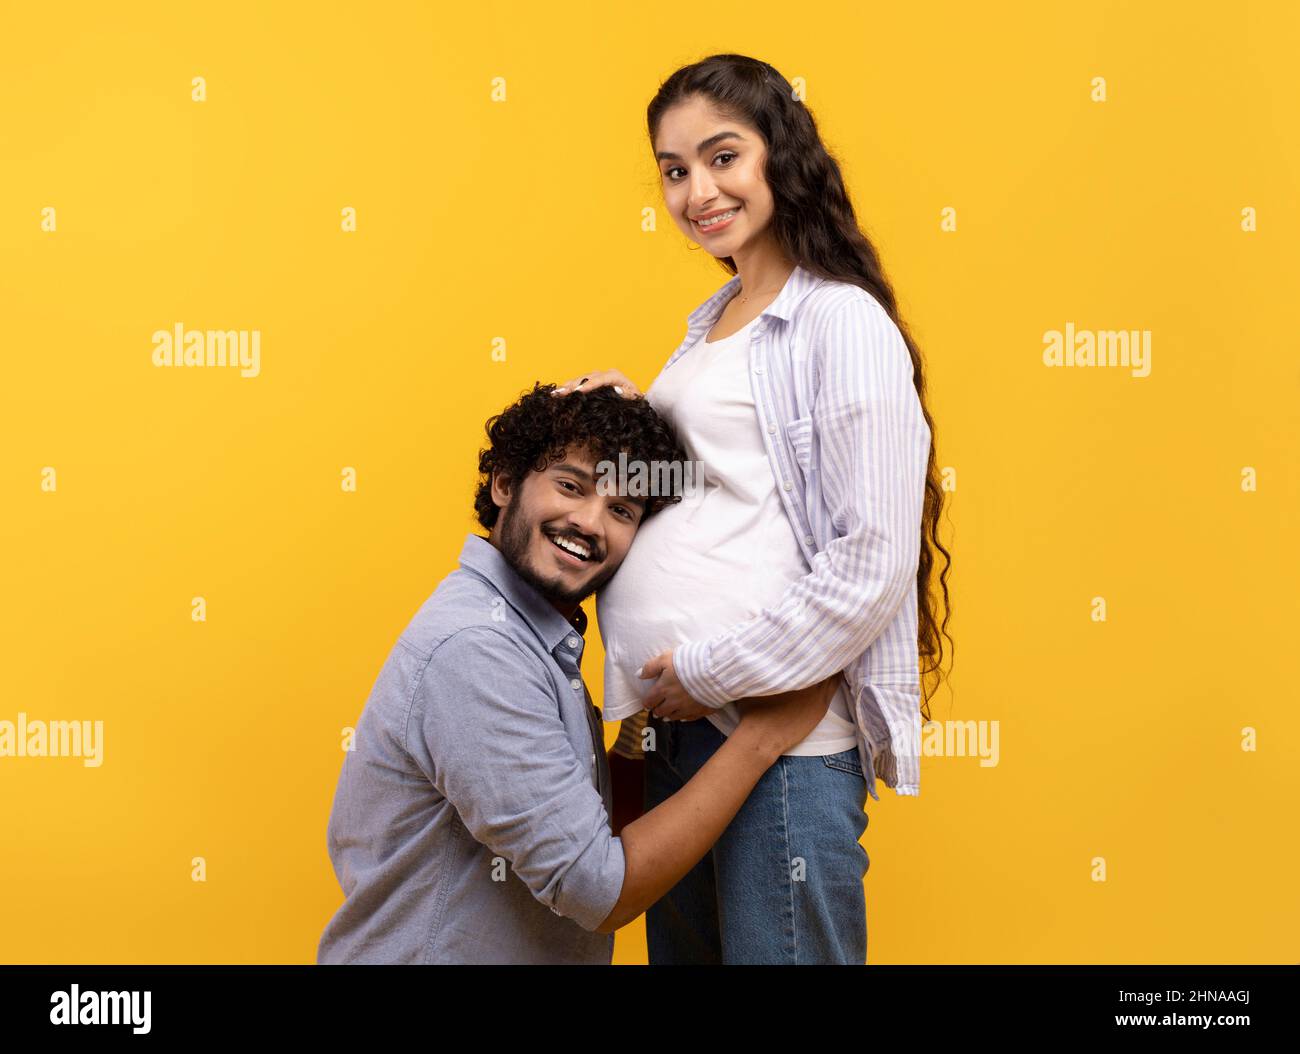 Caring indian man putting his ear on wife's pregnant tummy, listening to baby's heartbeat, yellow studio background Stock Photo